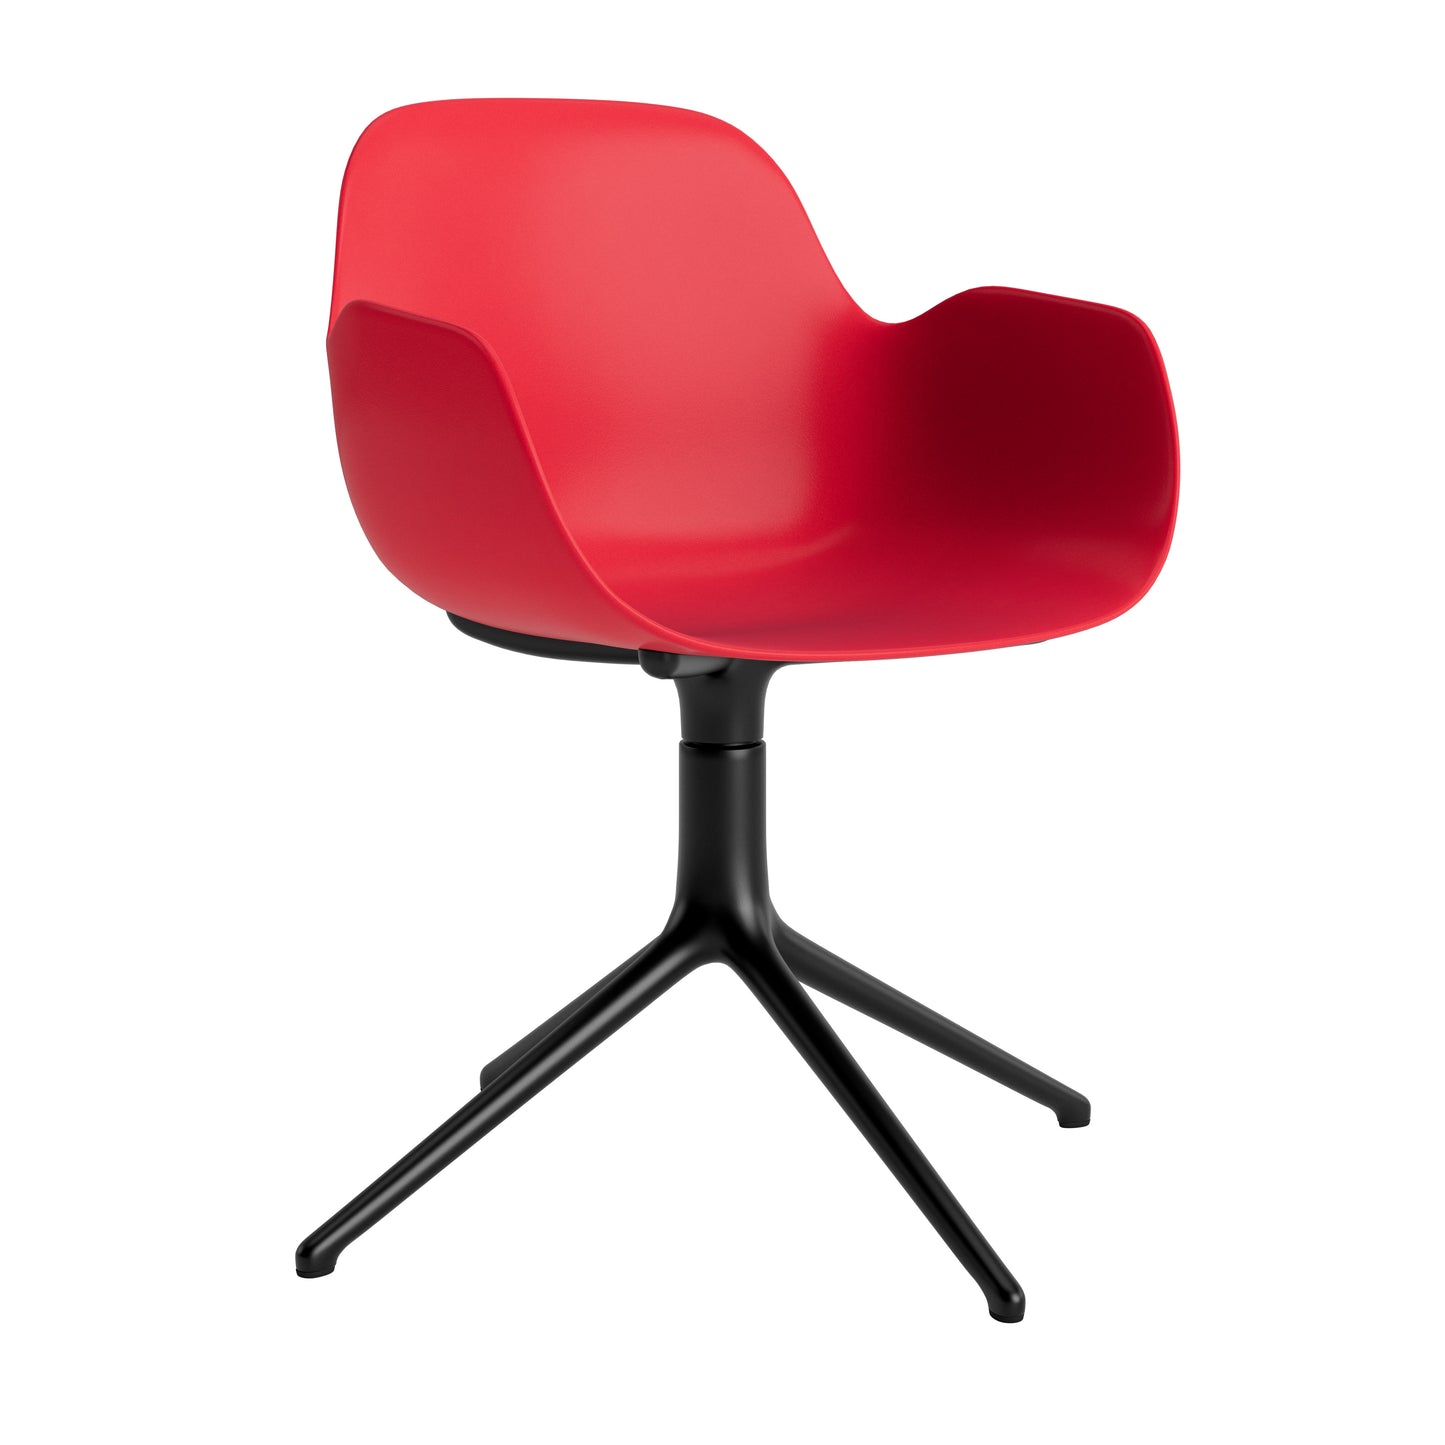 Form Armchair Swivel 4L - Poly seat